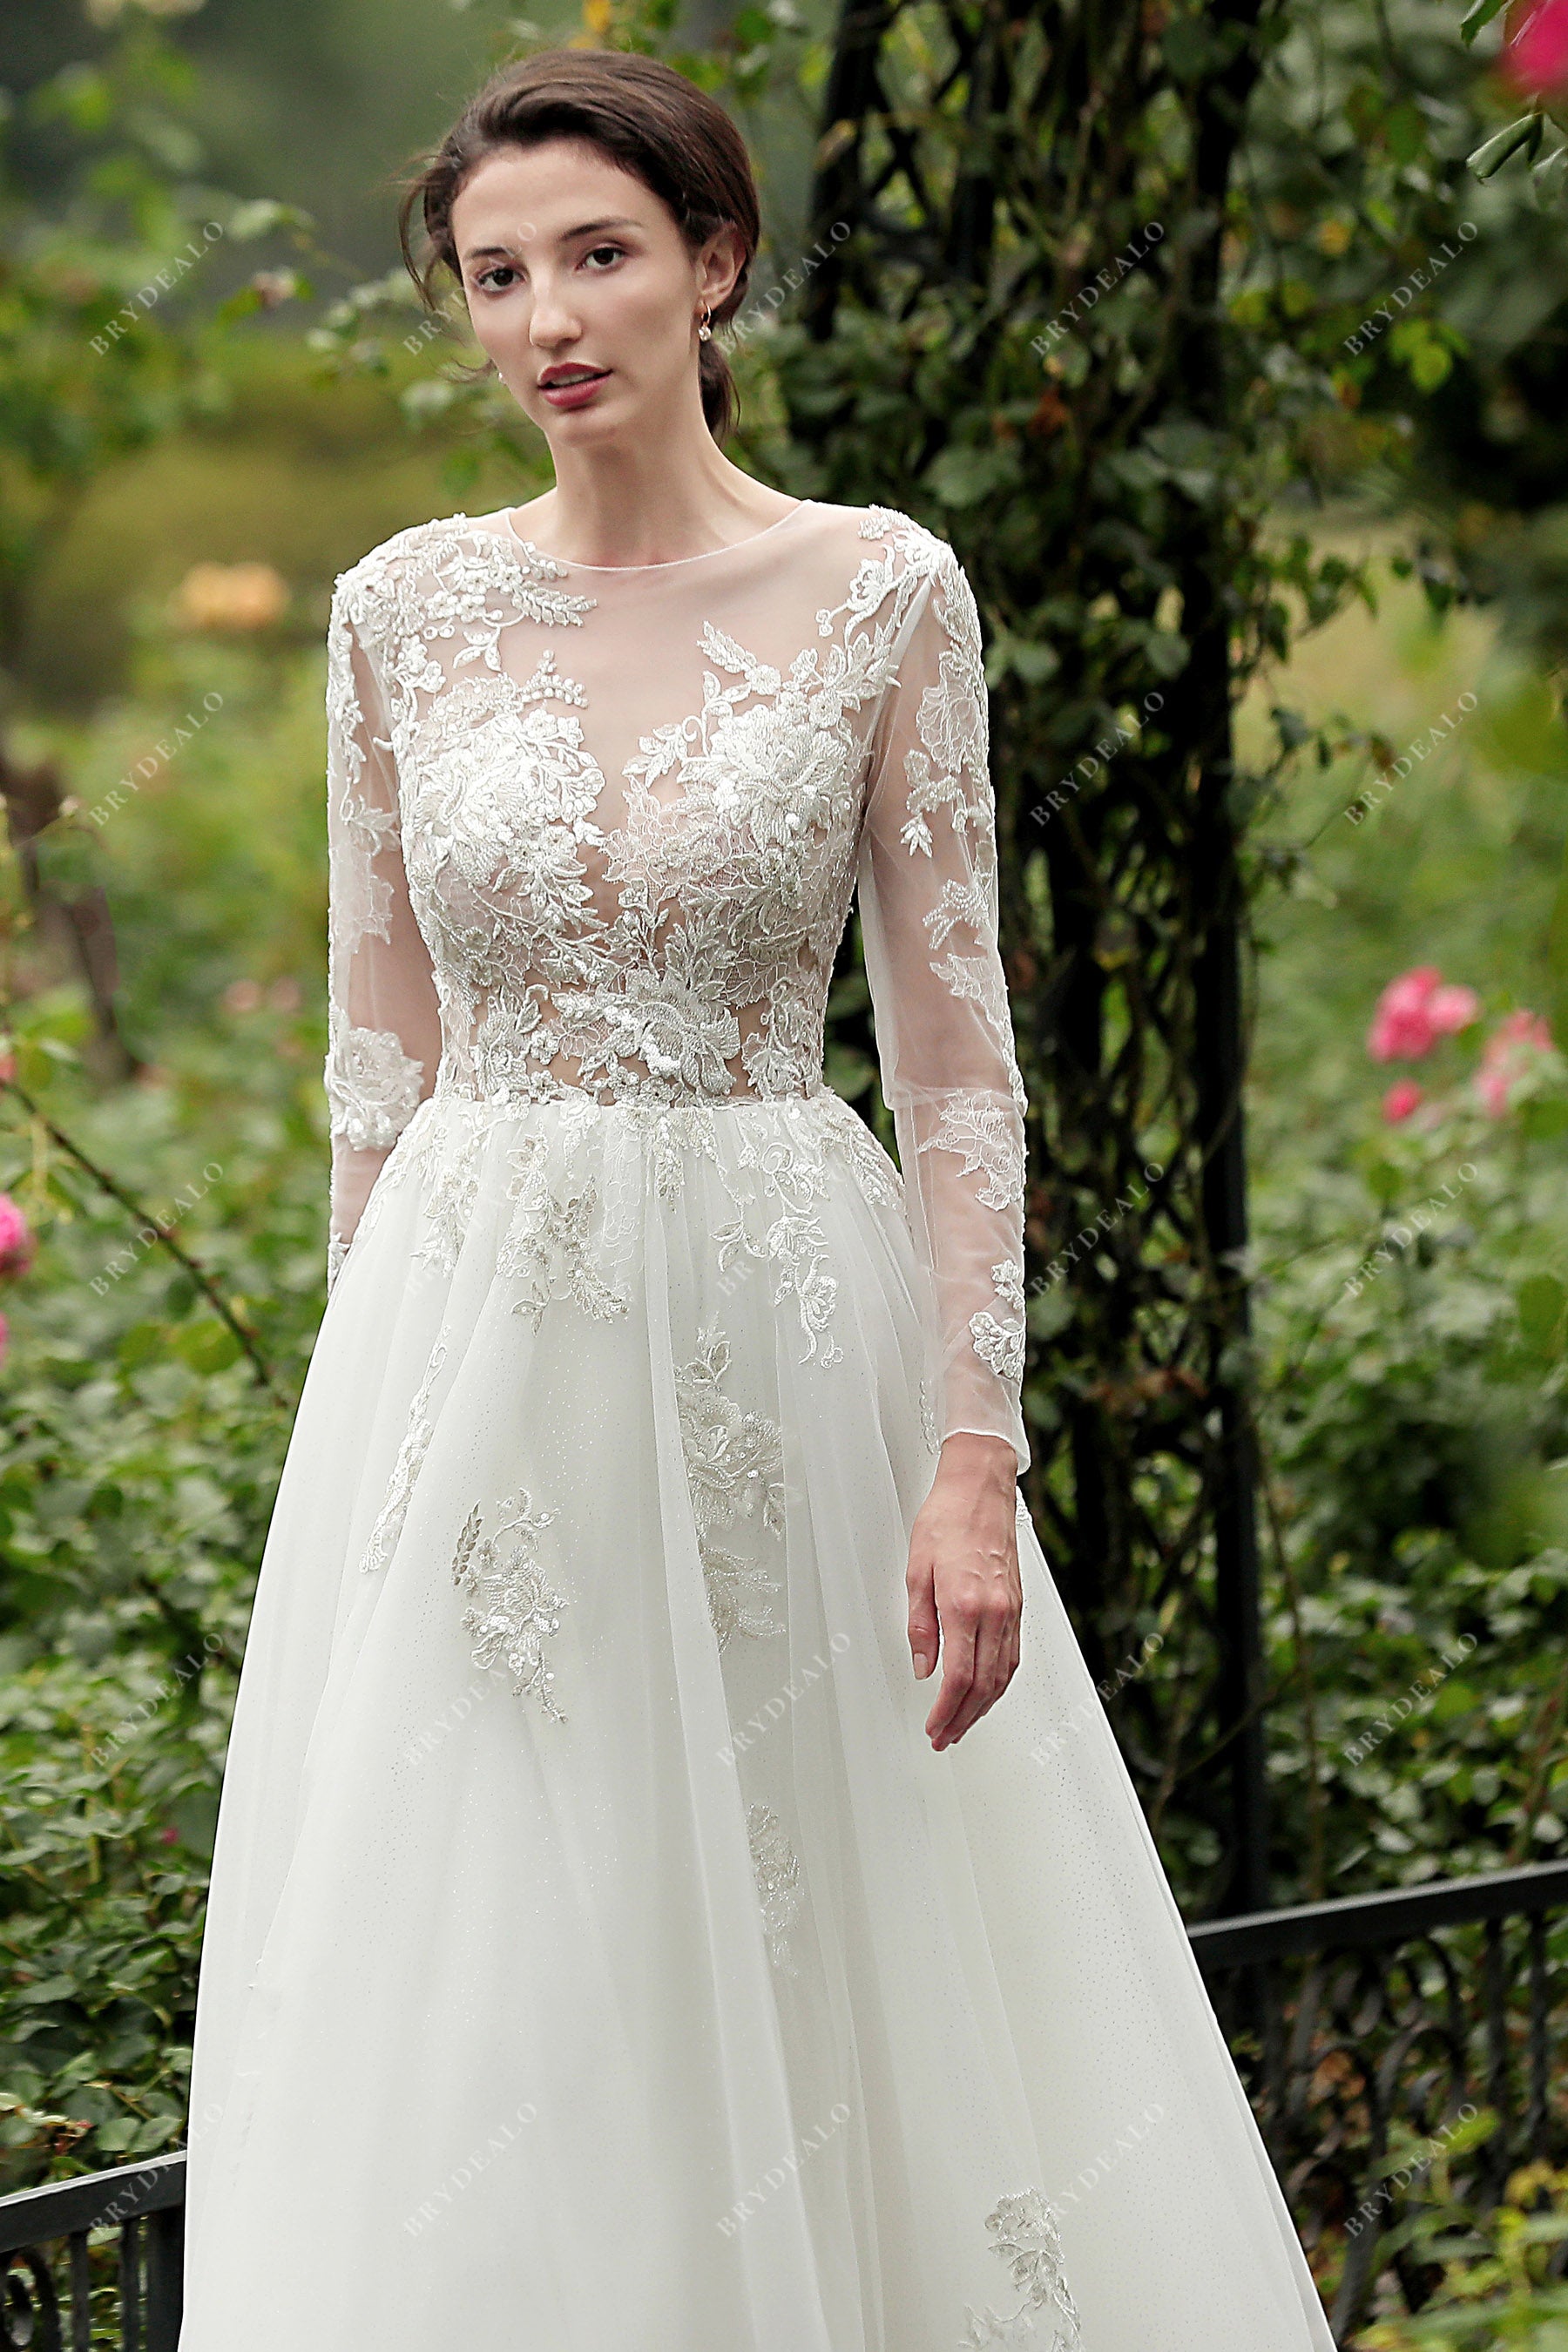 shimmery lace A-line wedding dress